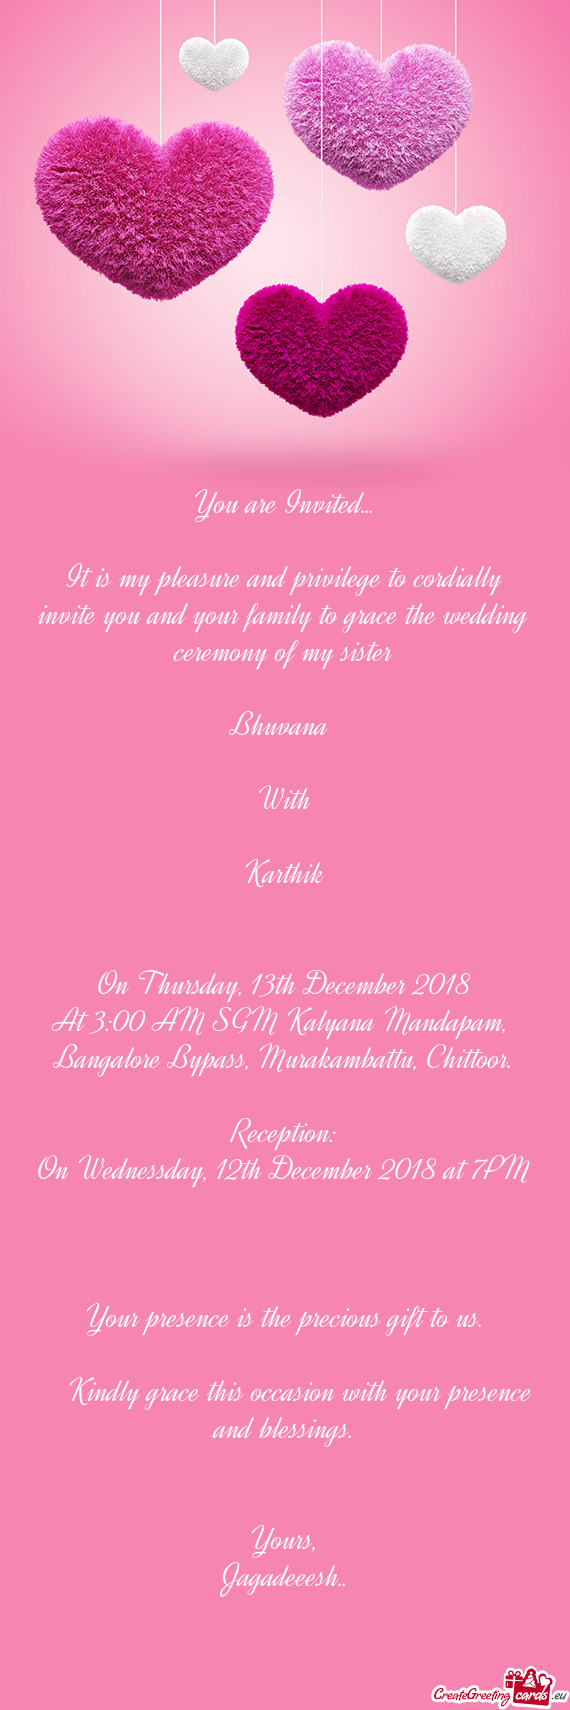 It is my pleasure and privilege to cordially invite you and your family to grace the wedding ceremon